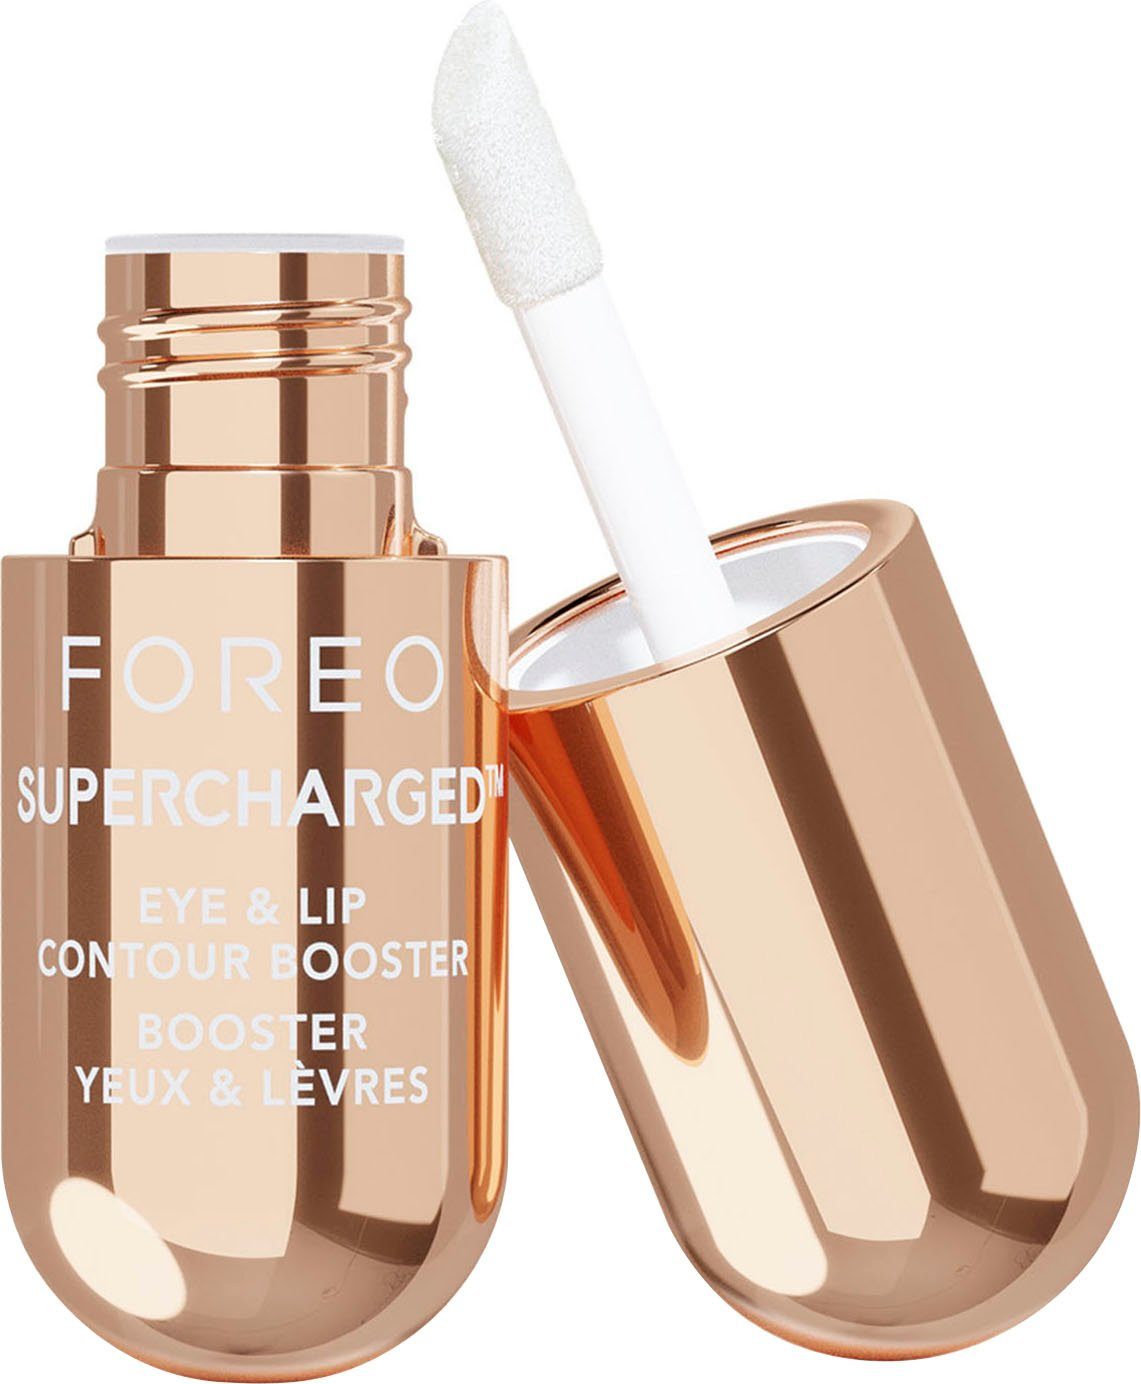 x SUPERCHARGED™ EYE LIP & 3-tlg. Packung, FOREO 3,5 ml CONTOUR Feuchtigkeitsgel BOOSTER 3